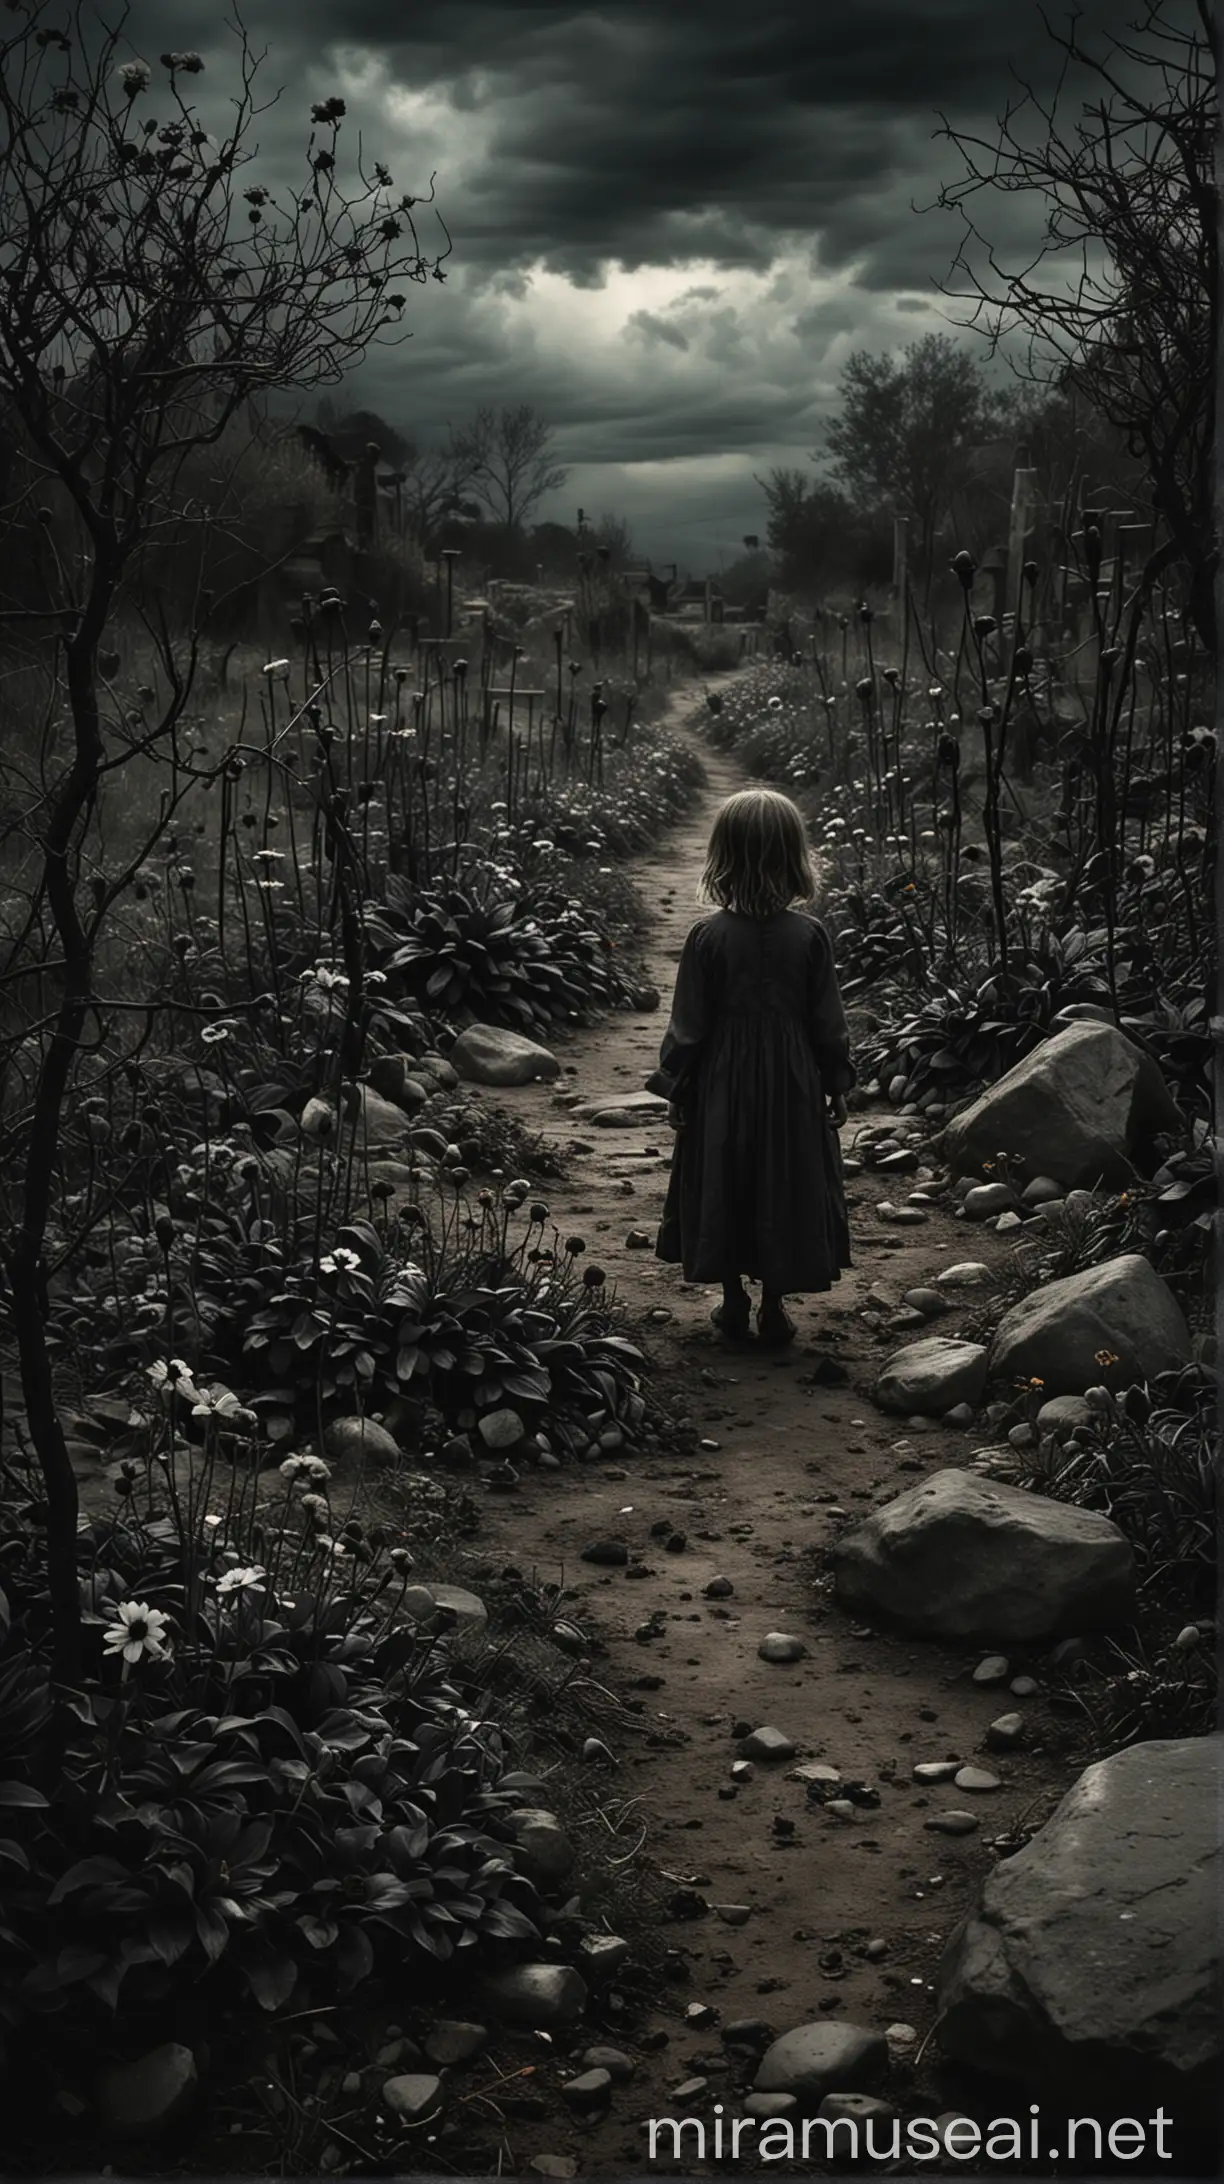 Sinister Garden Black Flowers and Ghostly Children in a Haunting Landscape